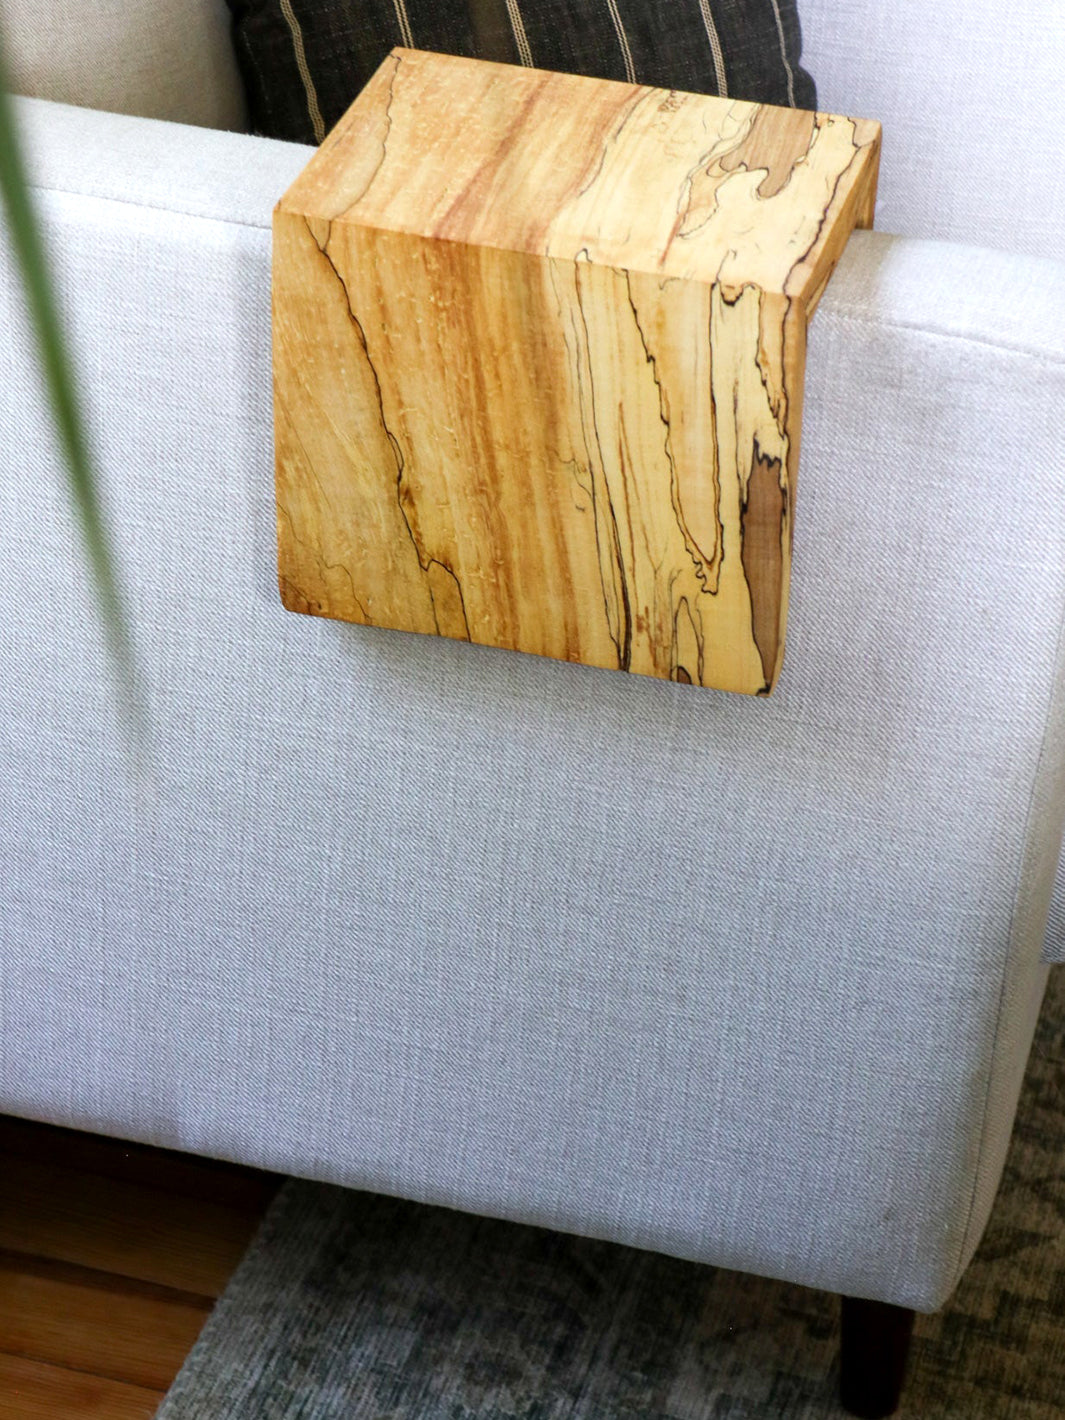 Solid 5" Spalted Maple Sofa Armrest Table (in stock)